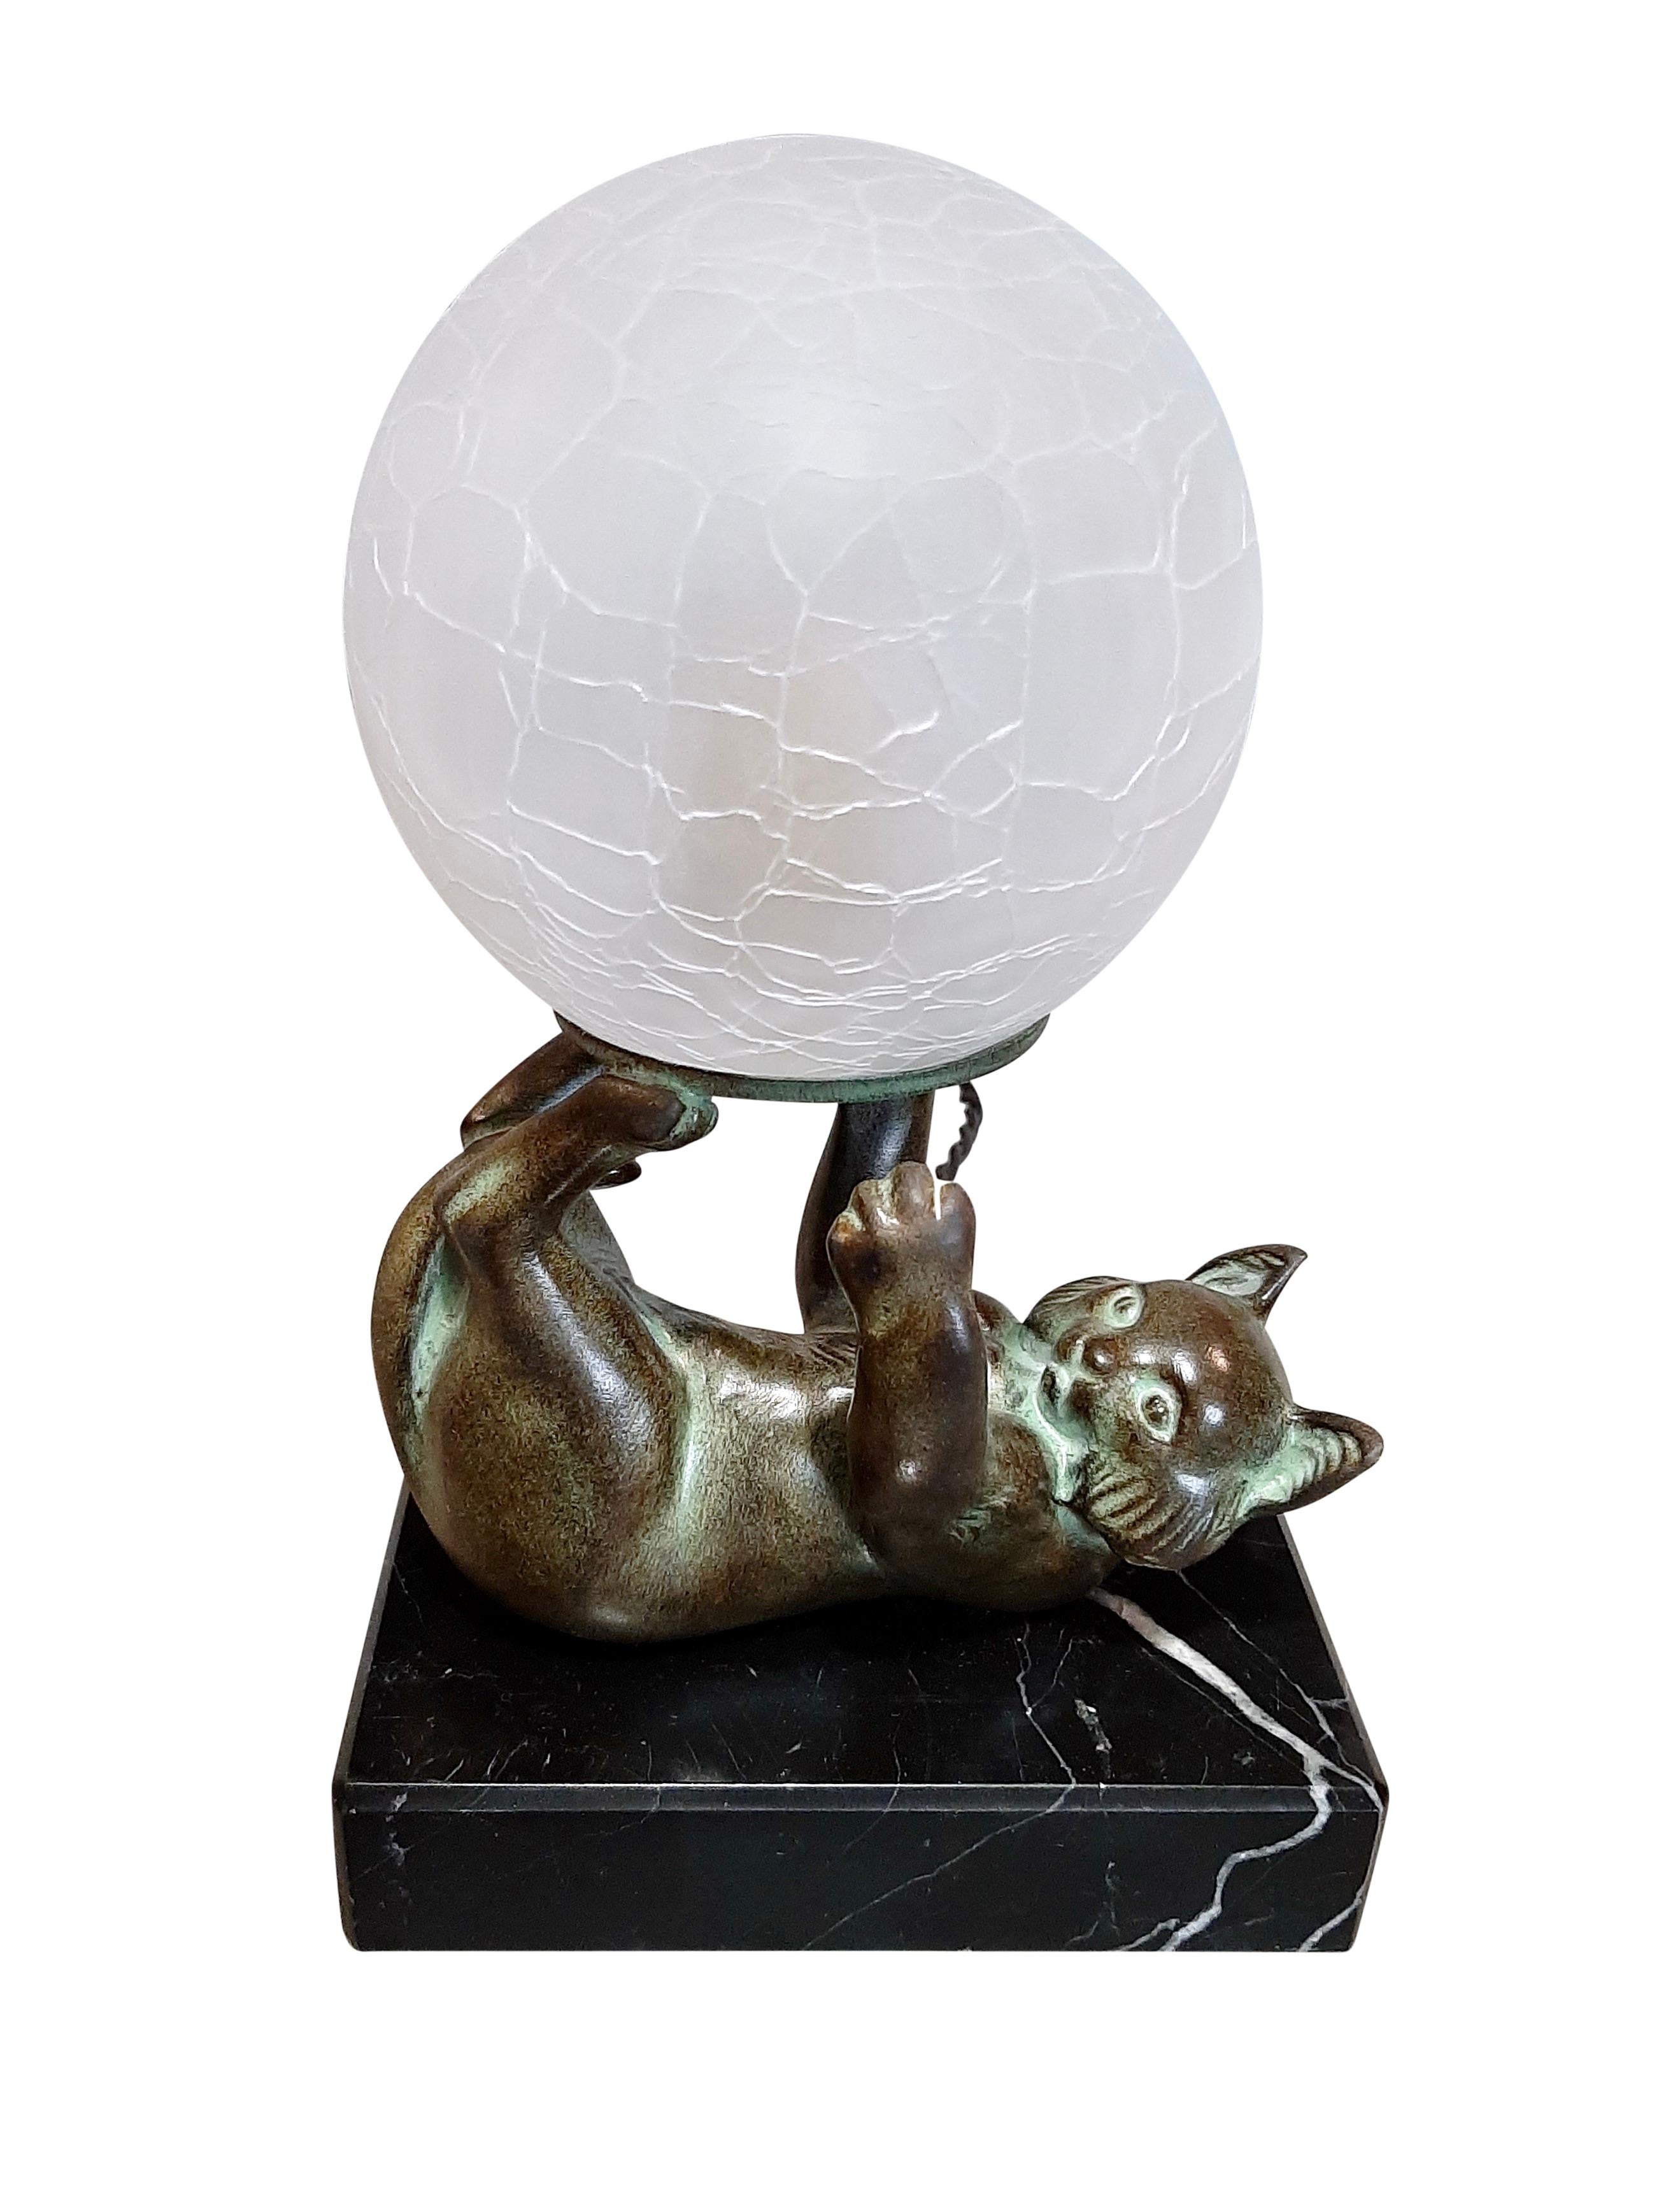 French Jongleur Table Lamp of a Cat with a Glass Ball by Janle and Max Le Verrier